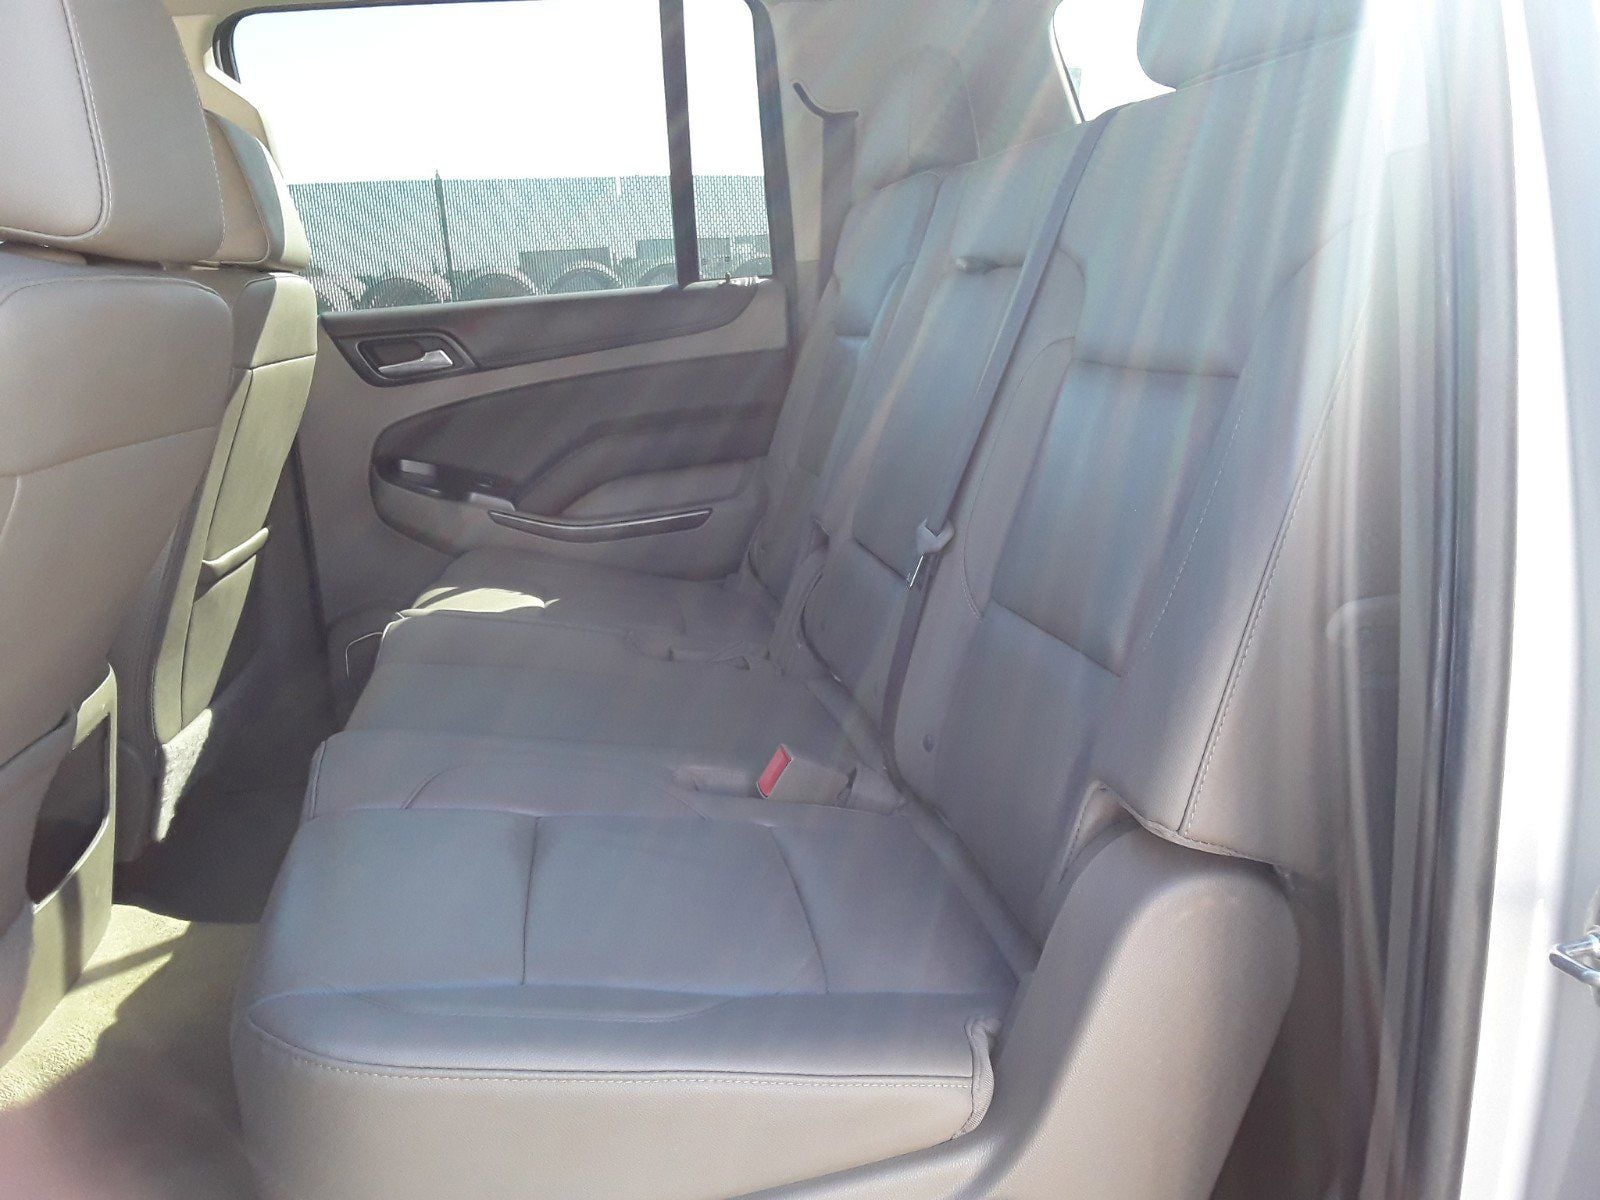 Interior/Upholstery - Wanted- Captain Chairs in Cocoa Dune in excellent condition - New or Used - 2018 Chevrolet C1500 Suburban - Richmond, VA 23235, United States